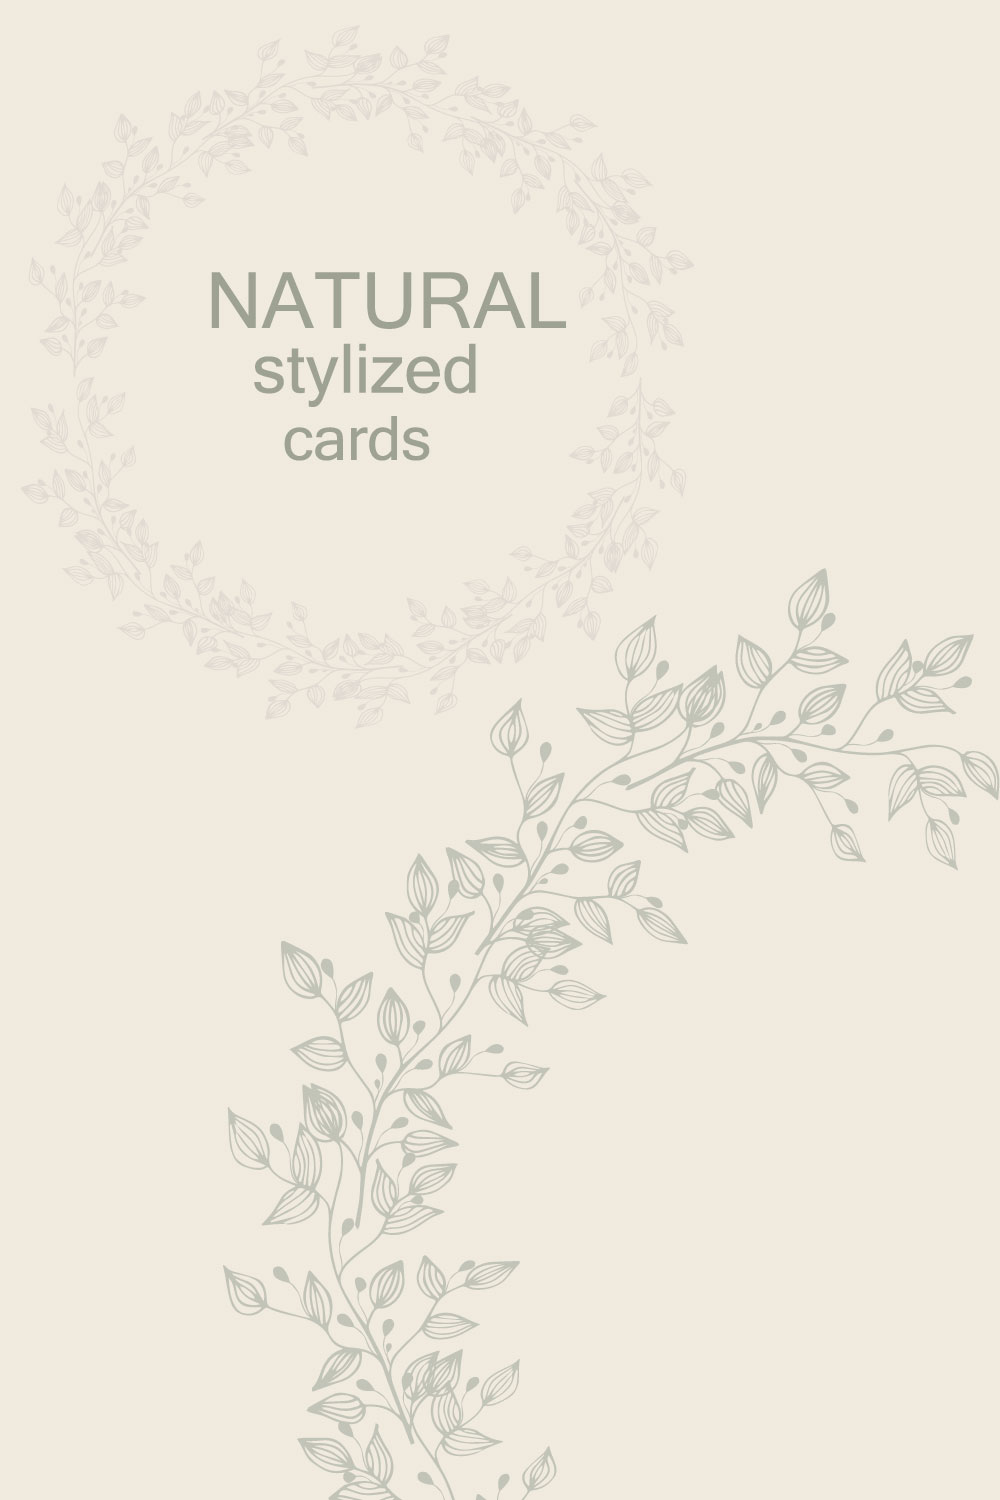 NATURAL stylized cards pinterest preview image.